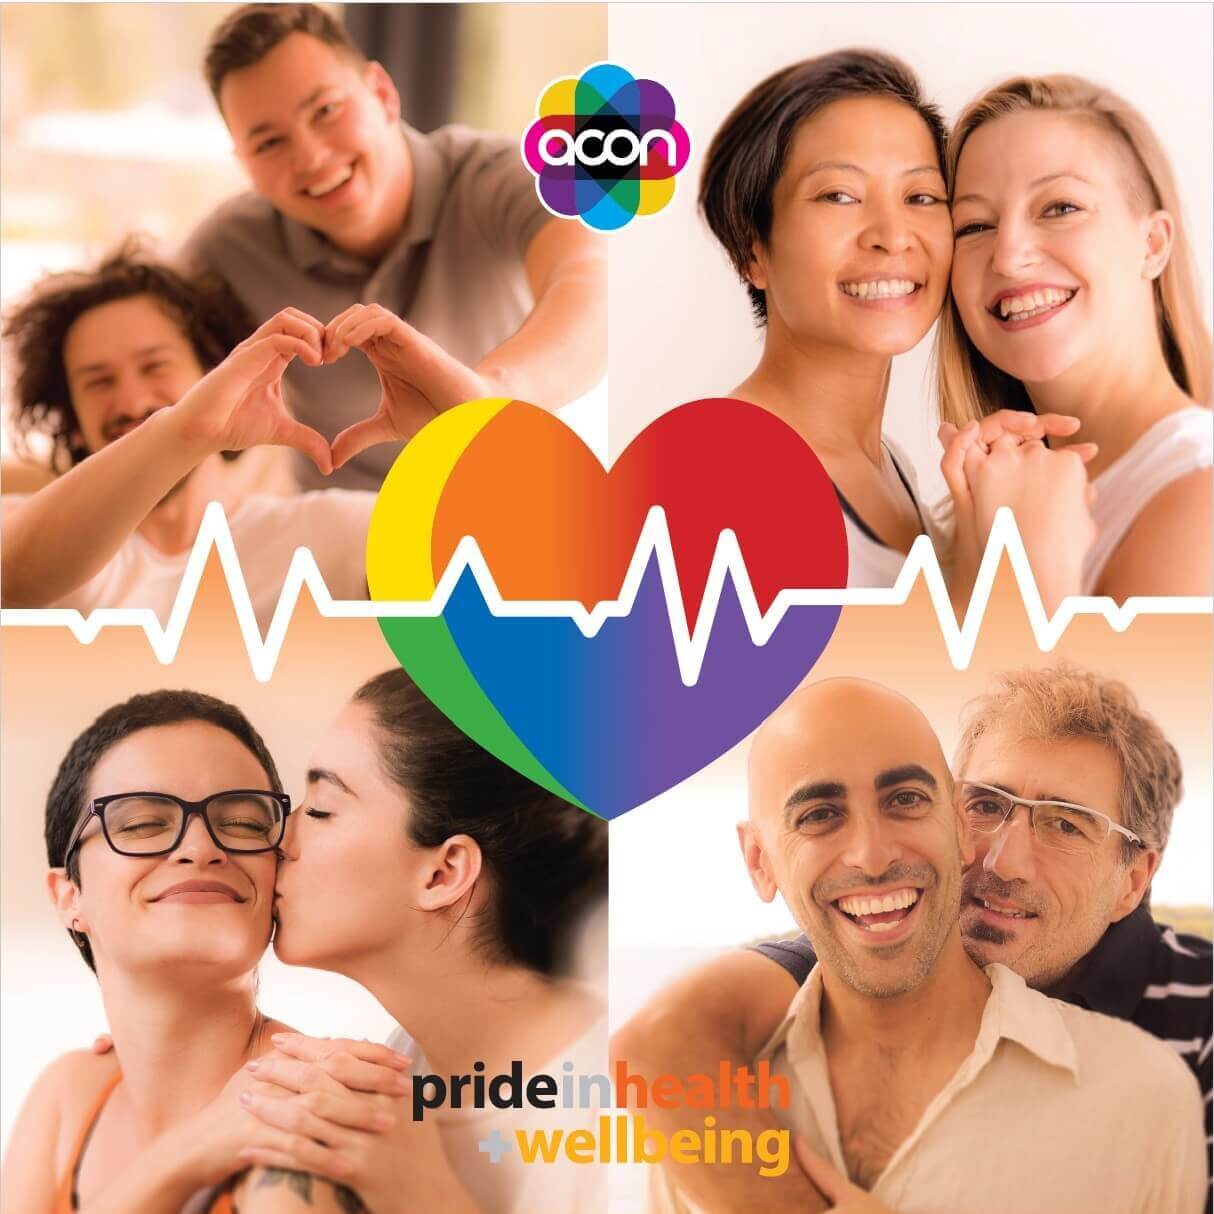 image of rainbow heart and heartbeat tracing in front of images of 4 LGBTQ couples in a variety of setting. ACON and Pride in Heath + Wellbeing logos on page too